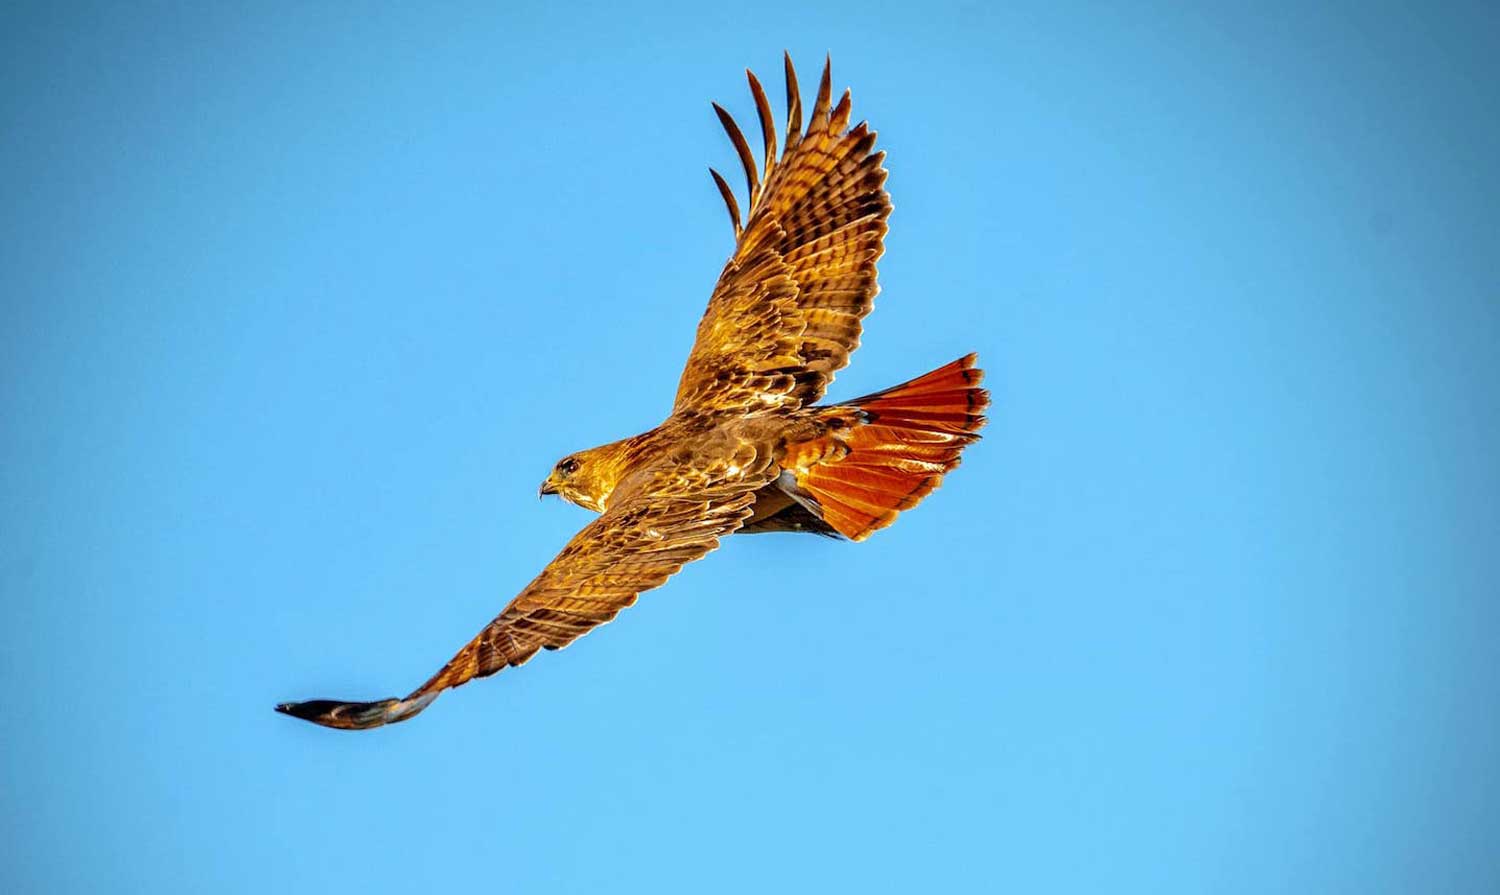 A red-tailed hawk flying under a bright blue sky.